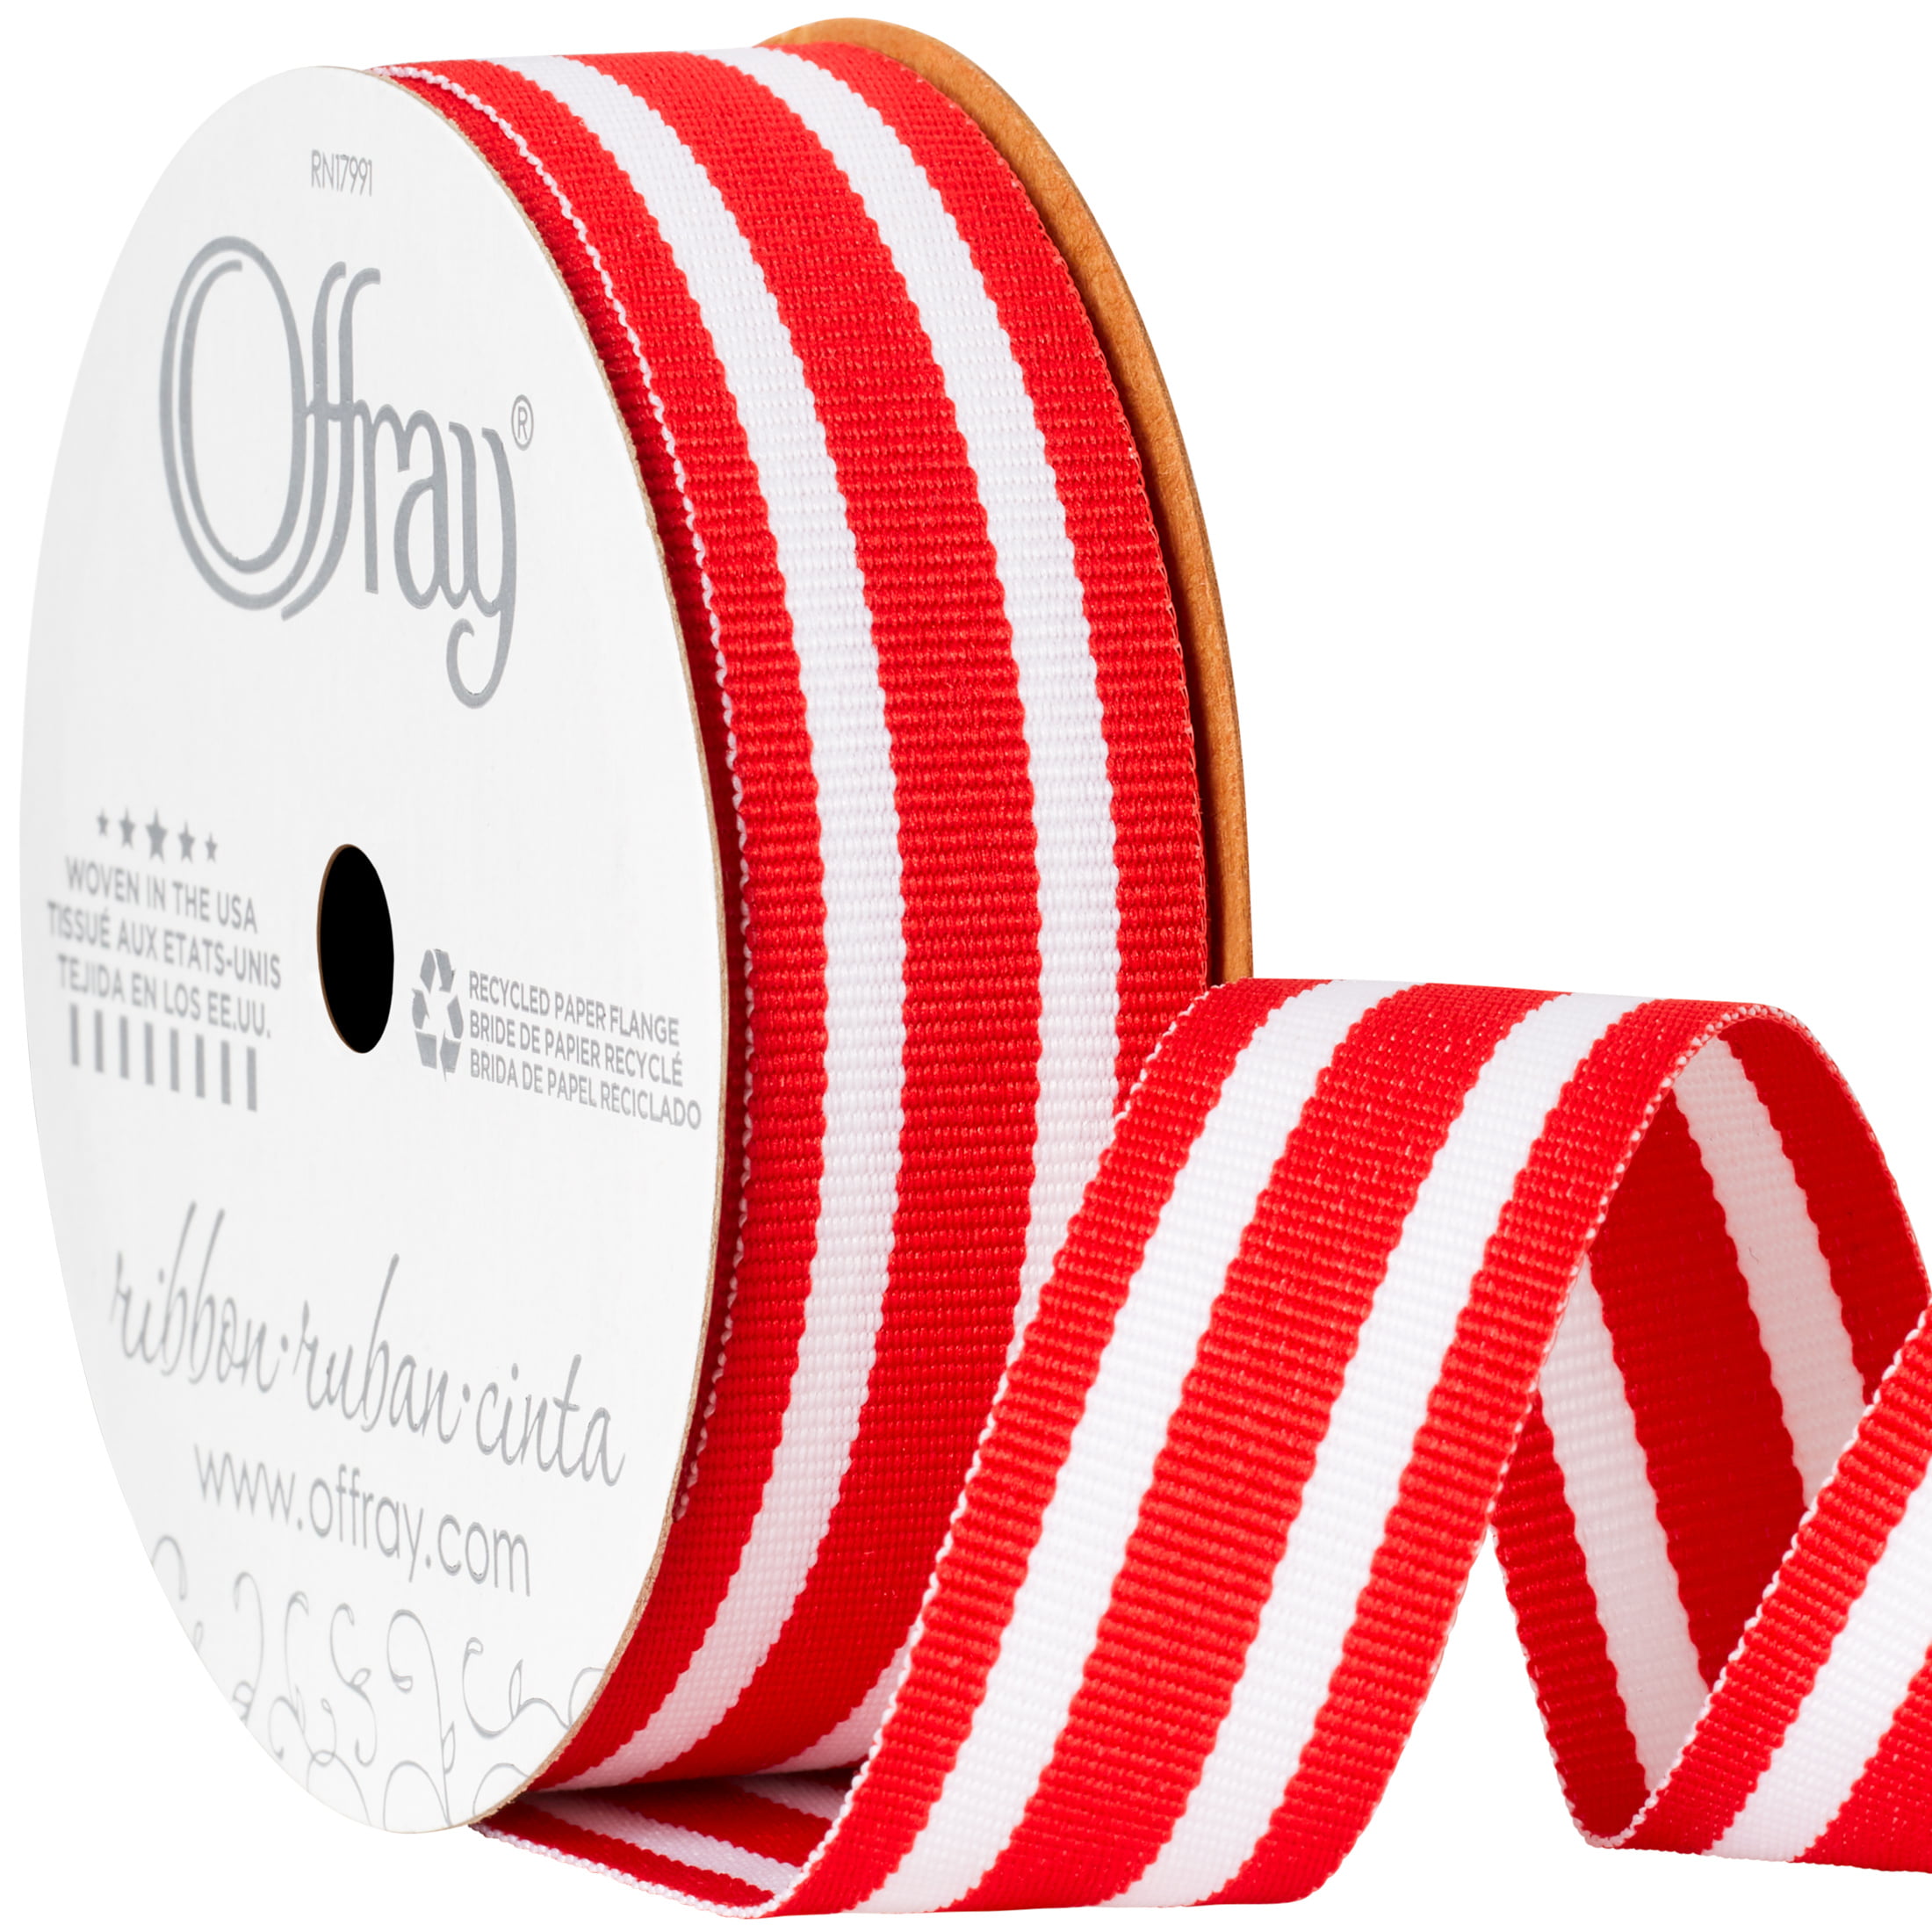 Rainbow Stripe Ribbon in primary colors on 7/8 white grosgrain